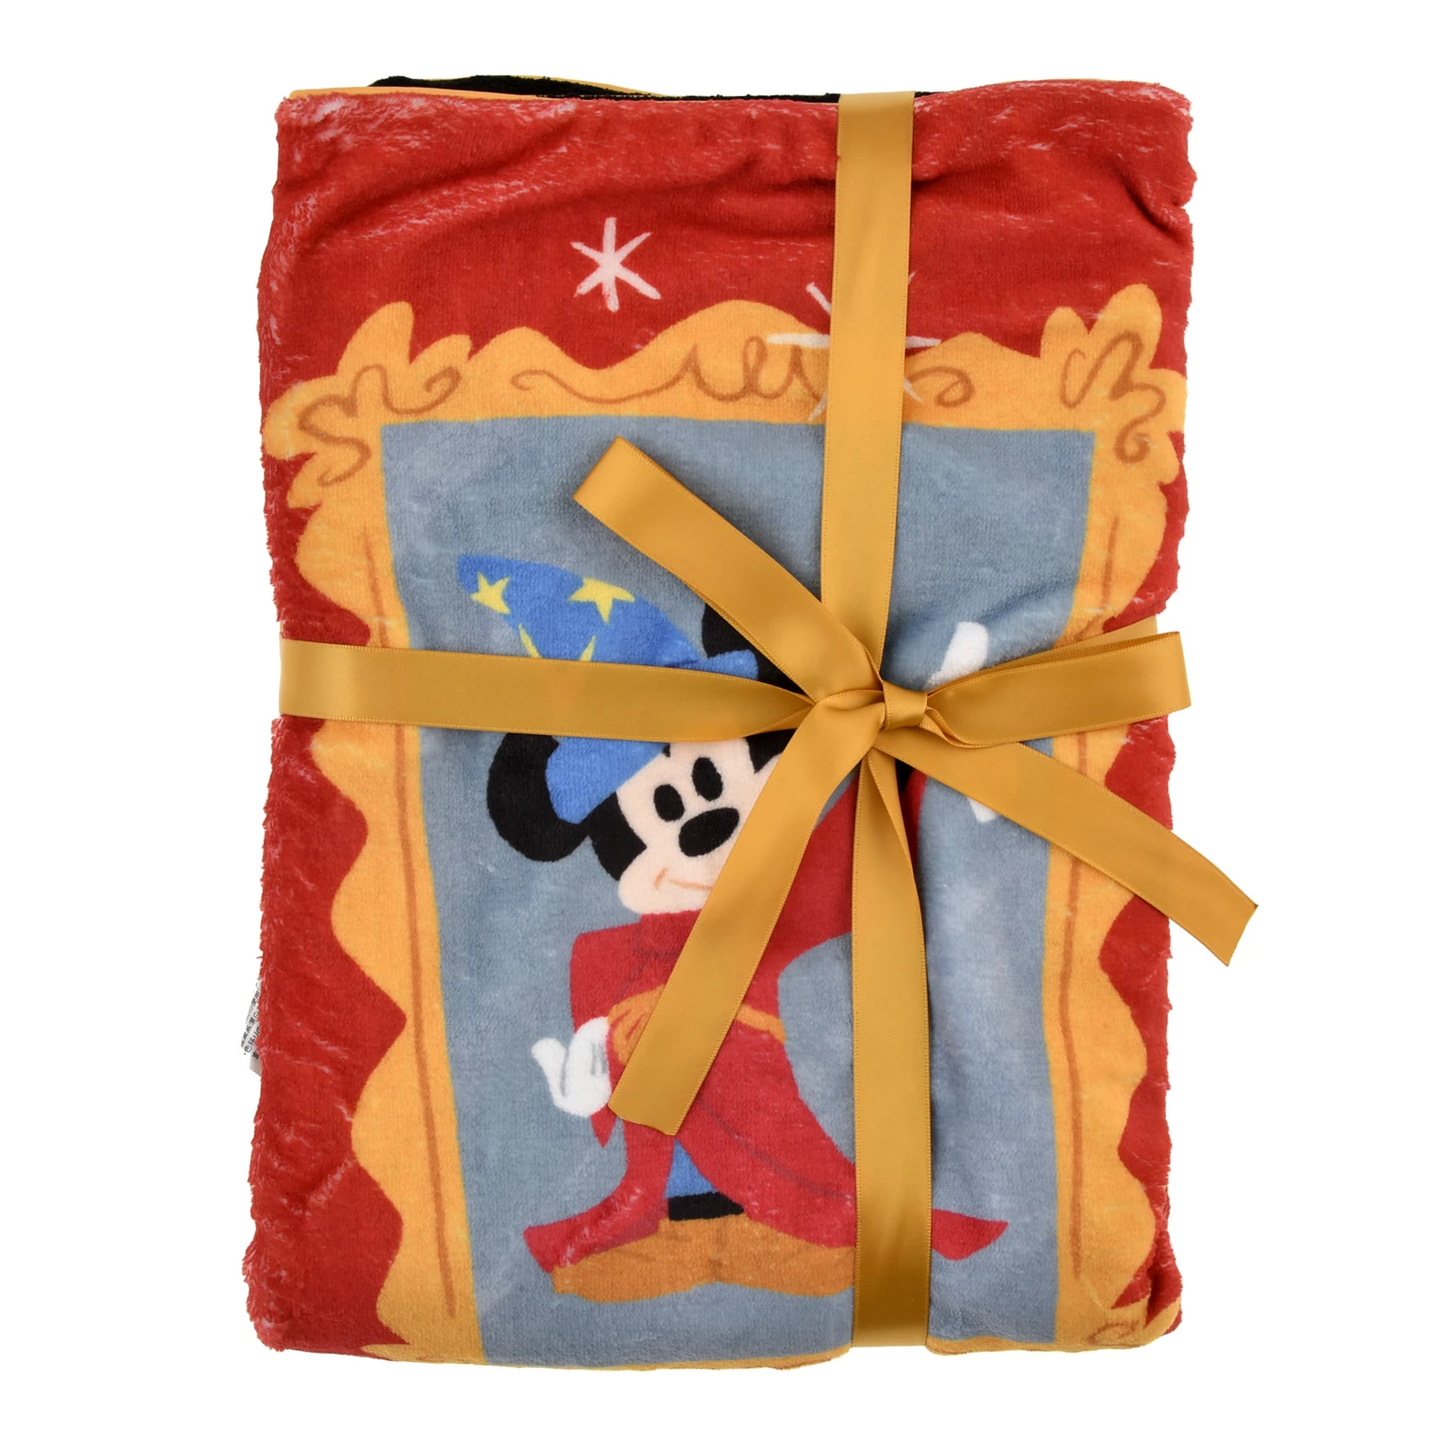 How to buy online from Disney Store Japan